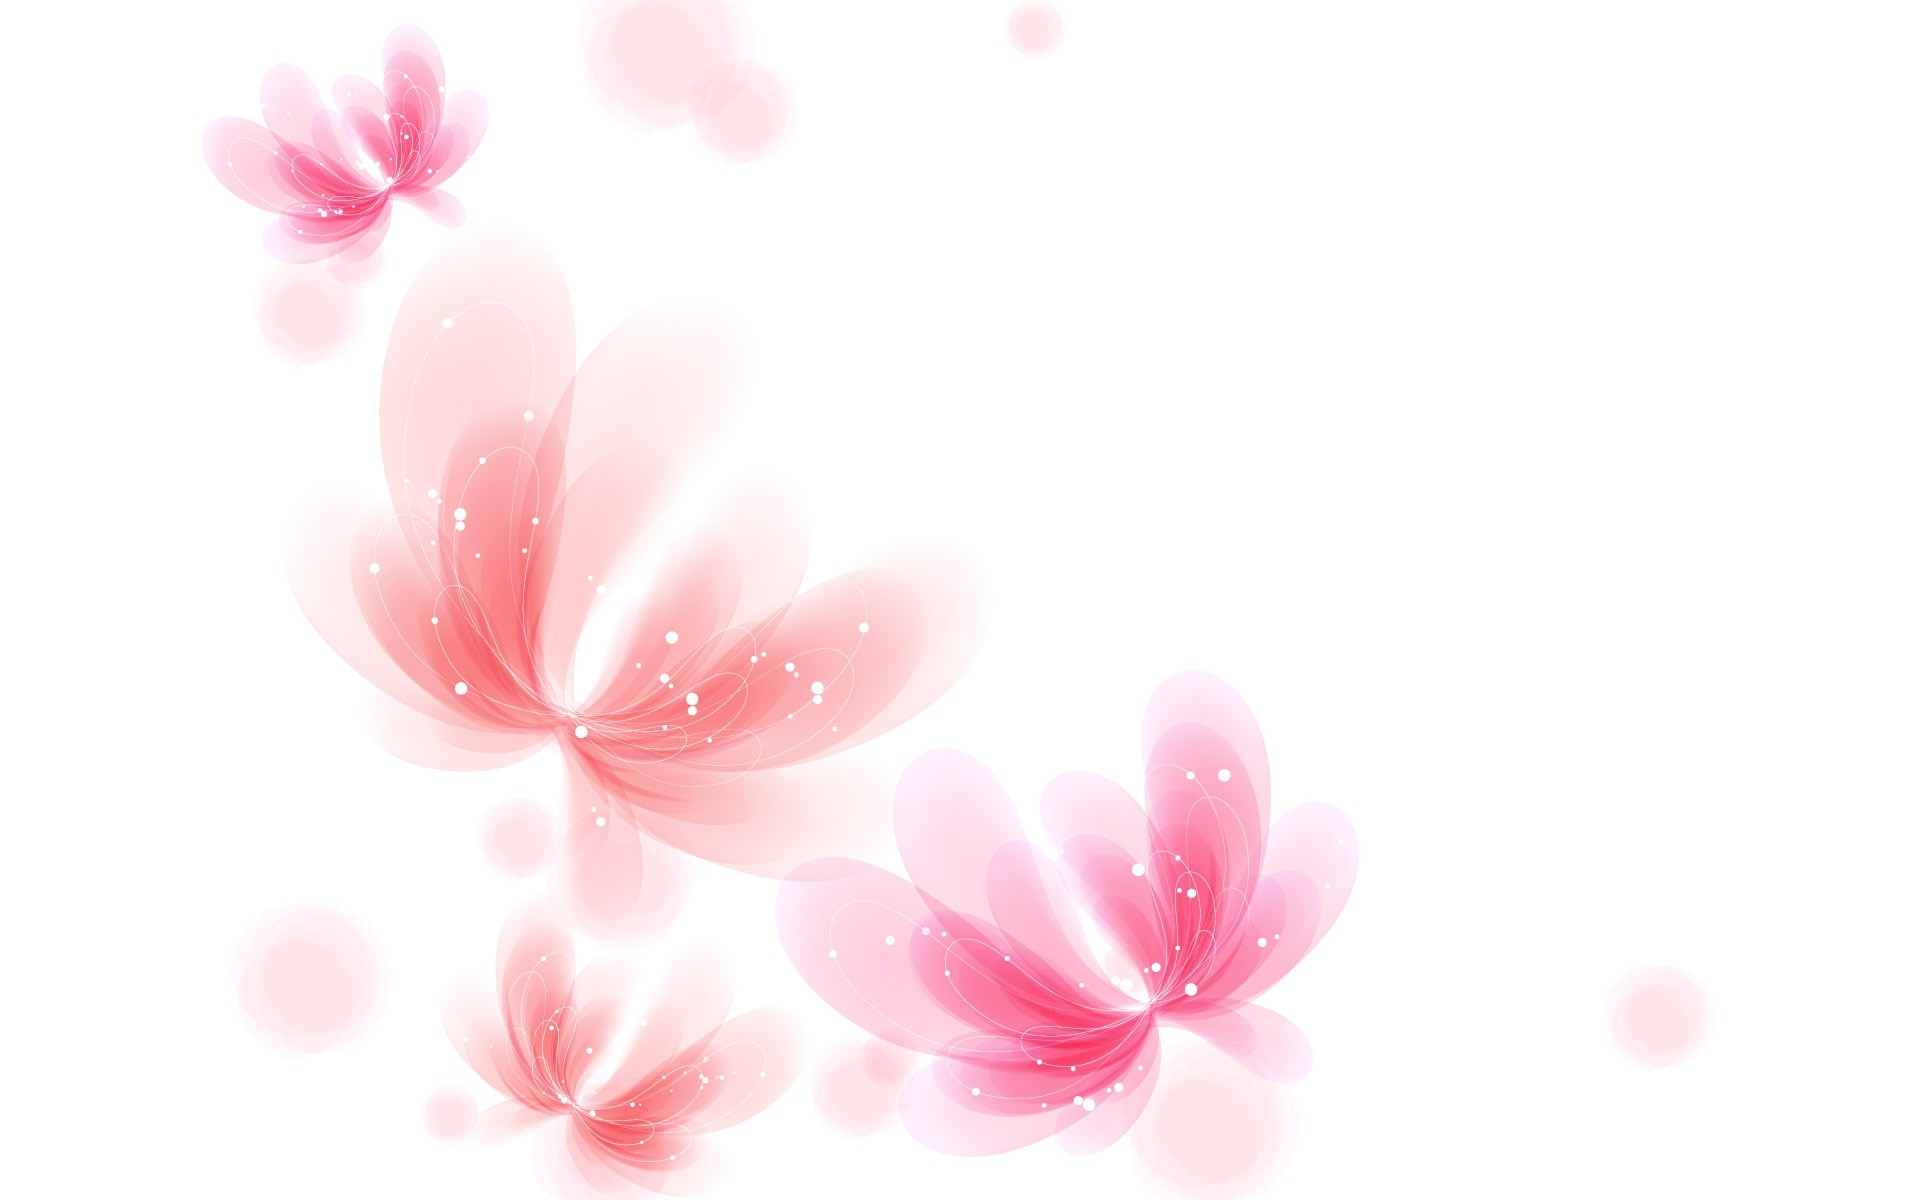 1920x1200 Black White And Pink Backgrounds 26 Free Hd Wallpaper. Black White And Pink  Backgrounds 26 Free Hd Wallpaper